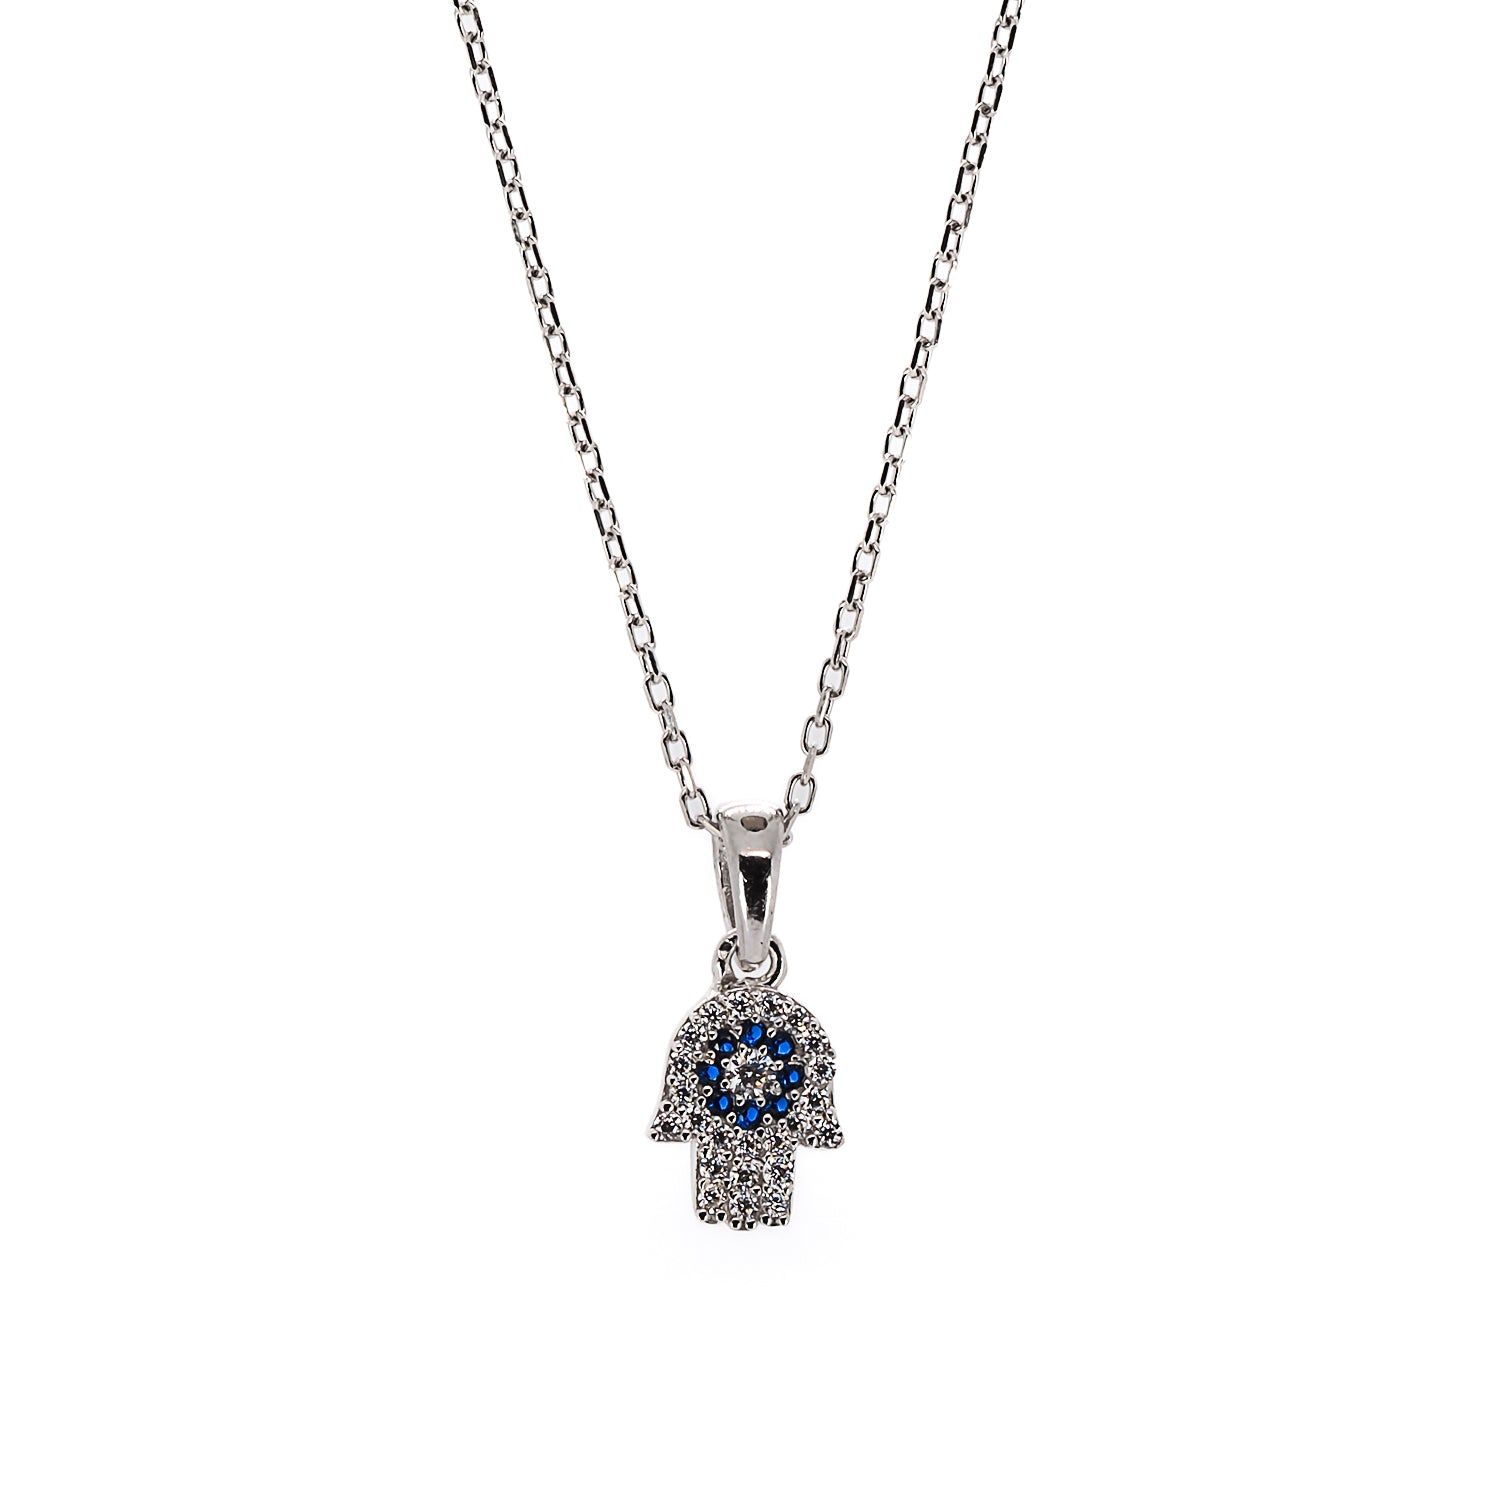 Sterling Silver Hamsa Hand Necklace with Zircon Stones - A Symbol of Protection and Blessings.